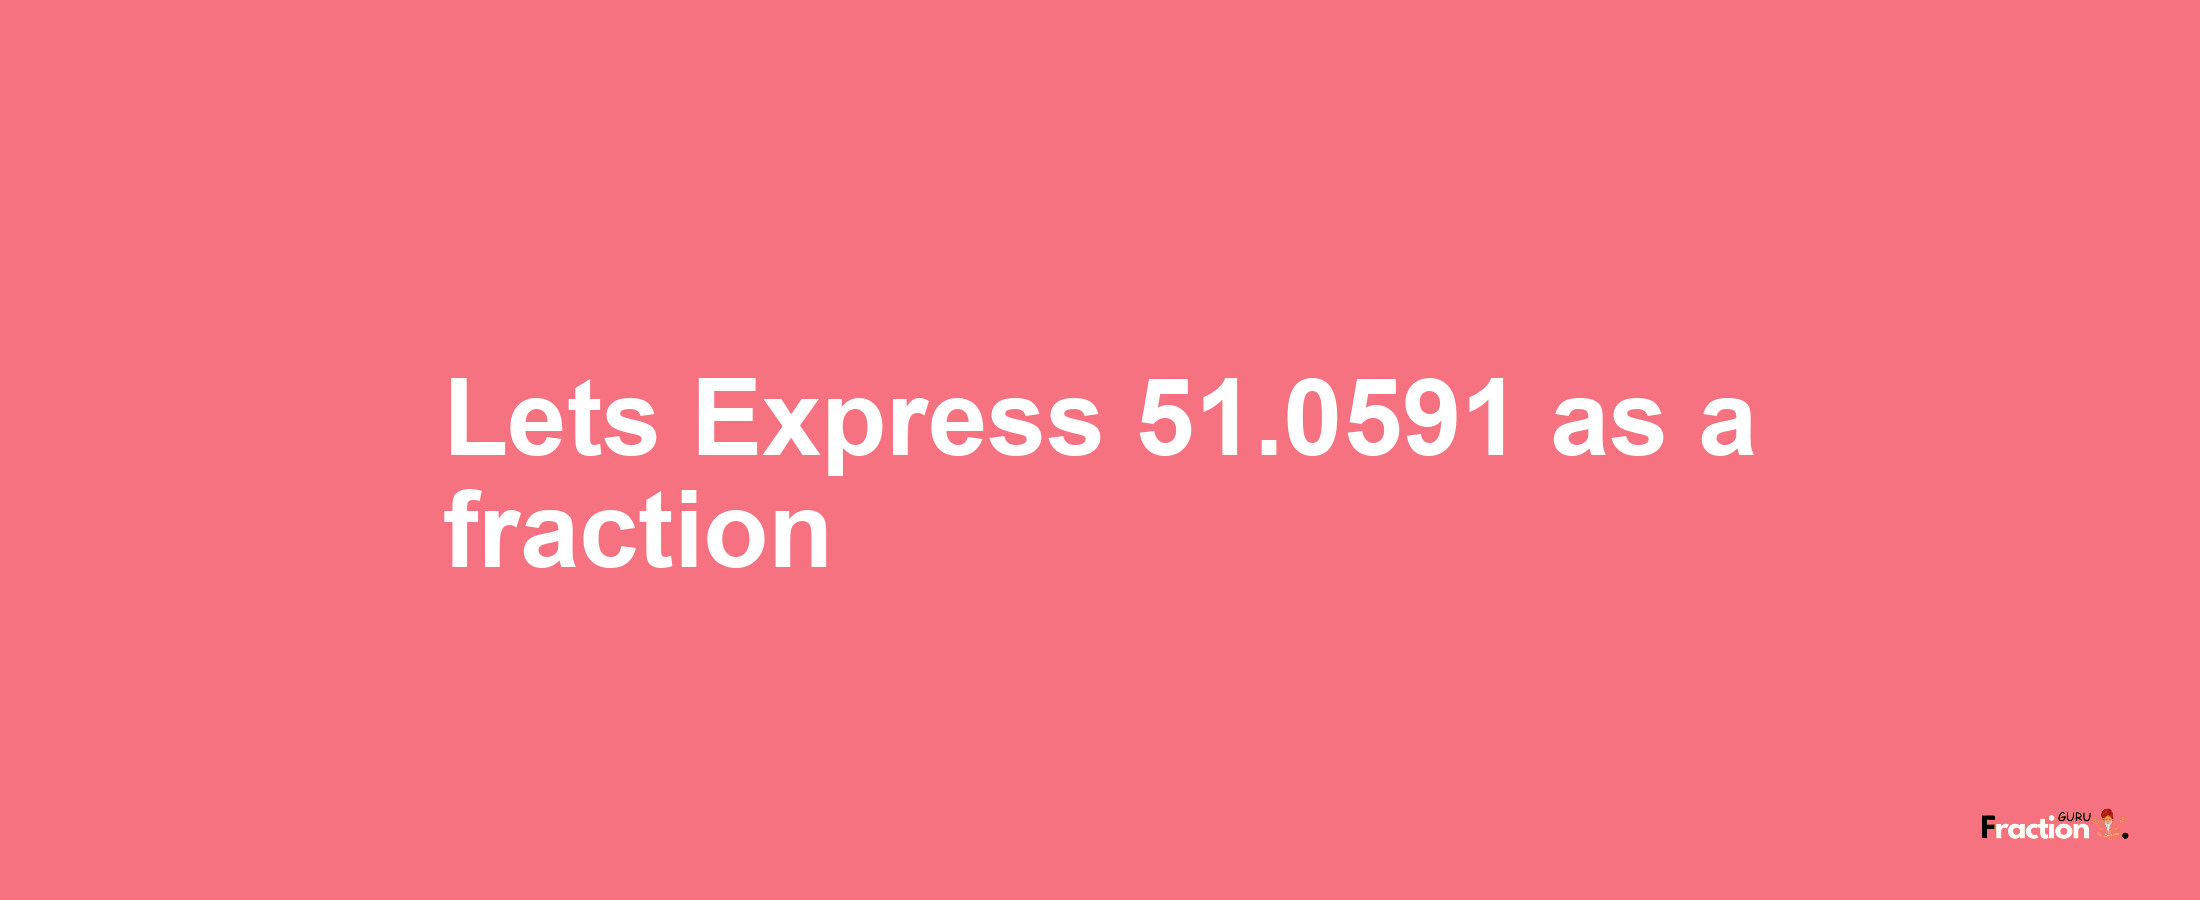 Lets Express 51.0591 as afraction